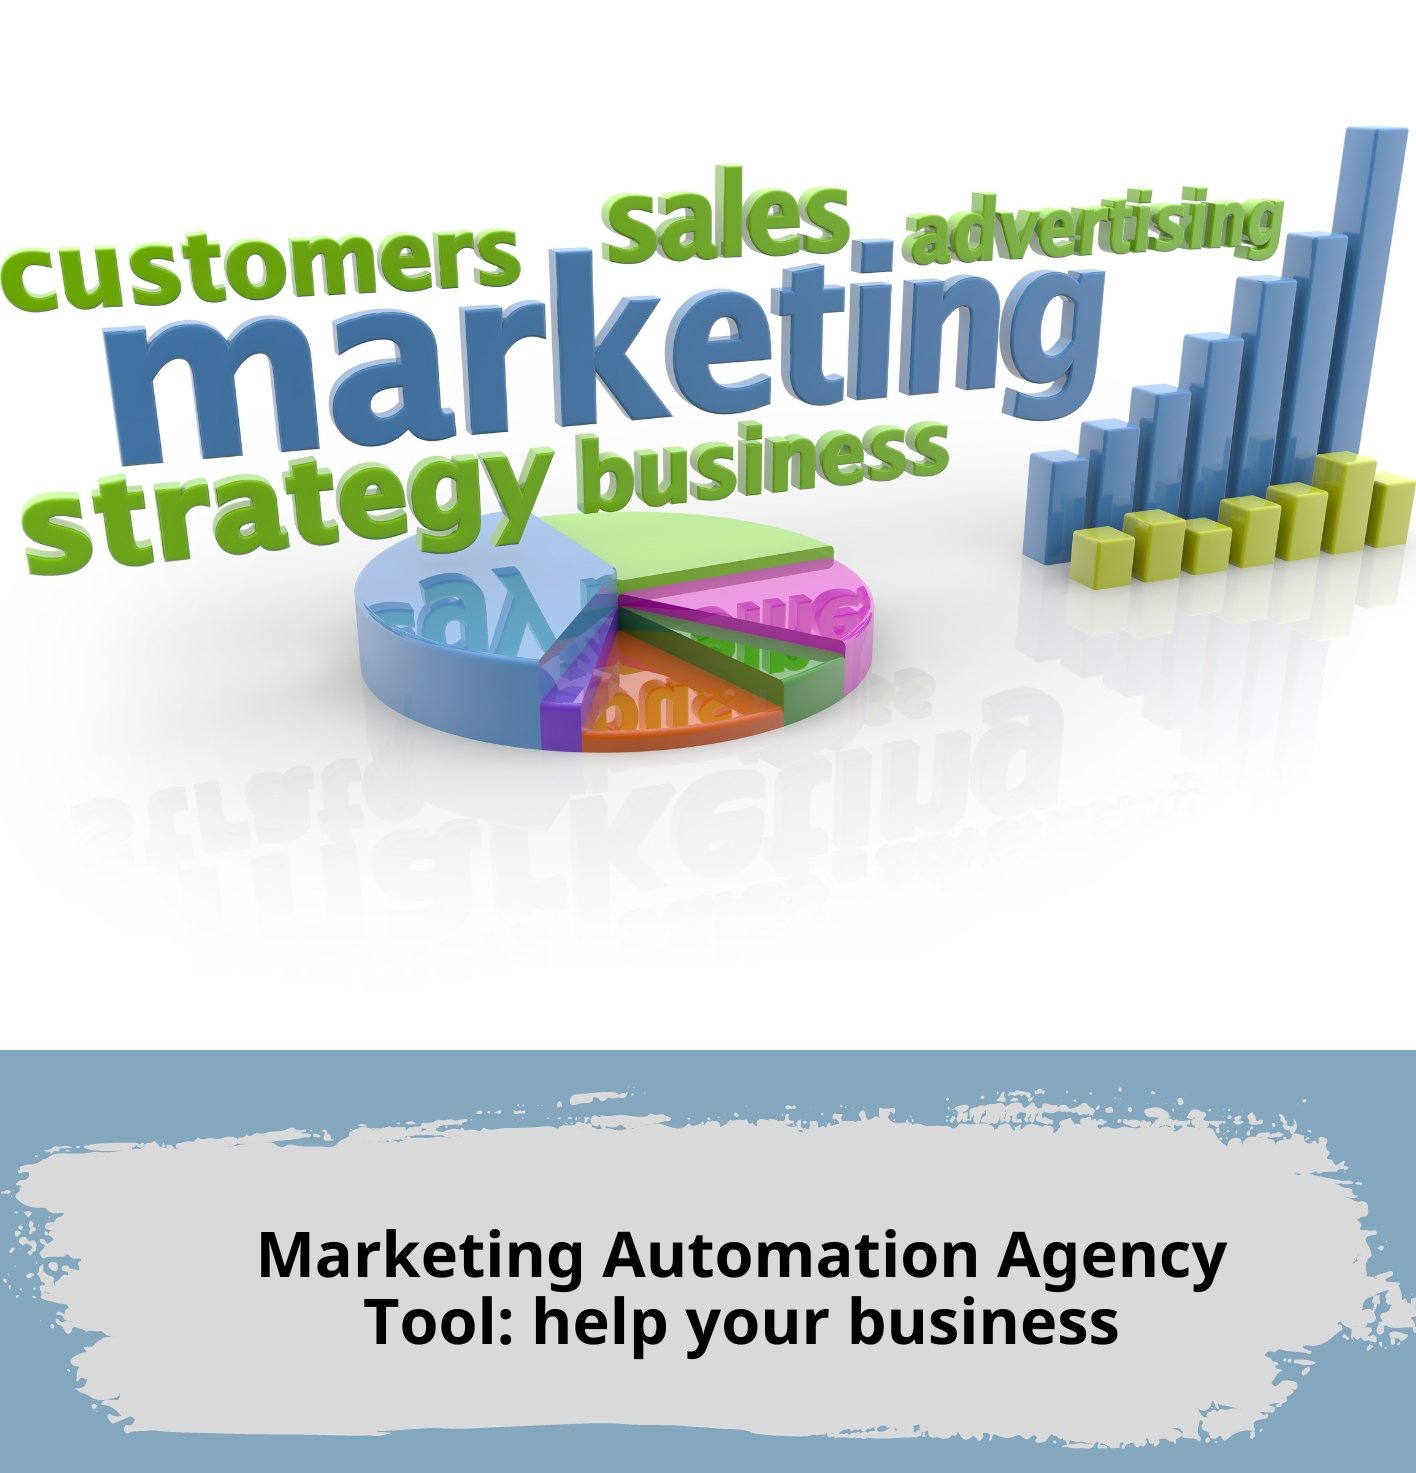 Marketing Automation Agency Tool help your business?